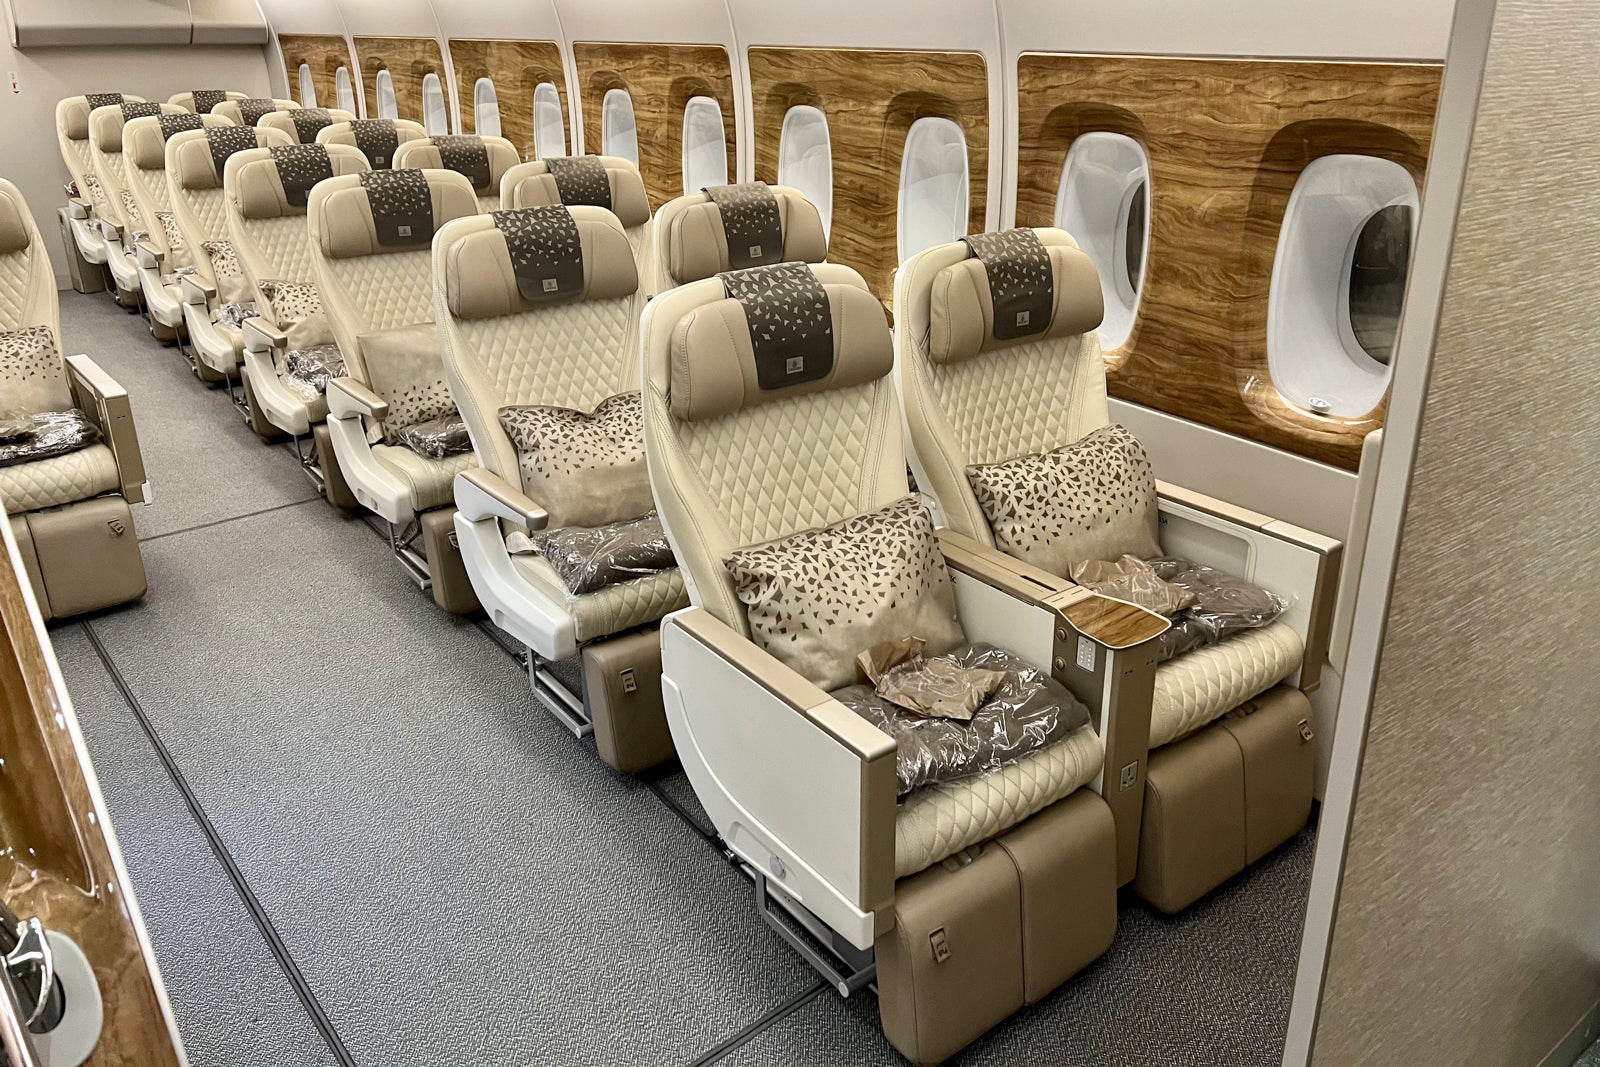 Emirates is bringing its new premium economy experience to the US - The ...